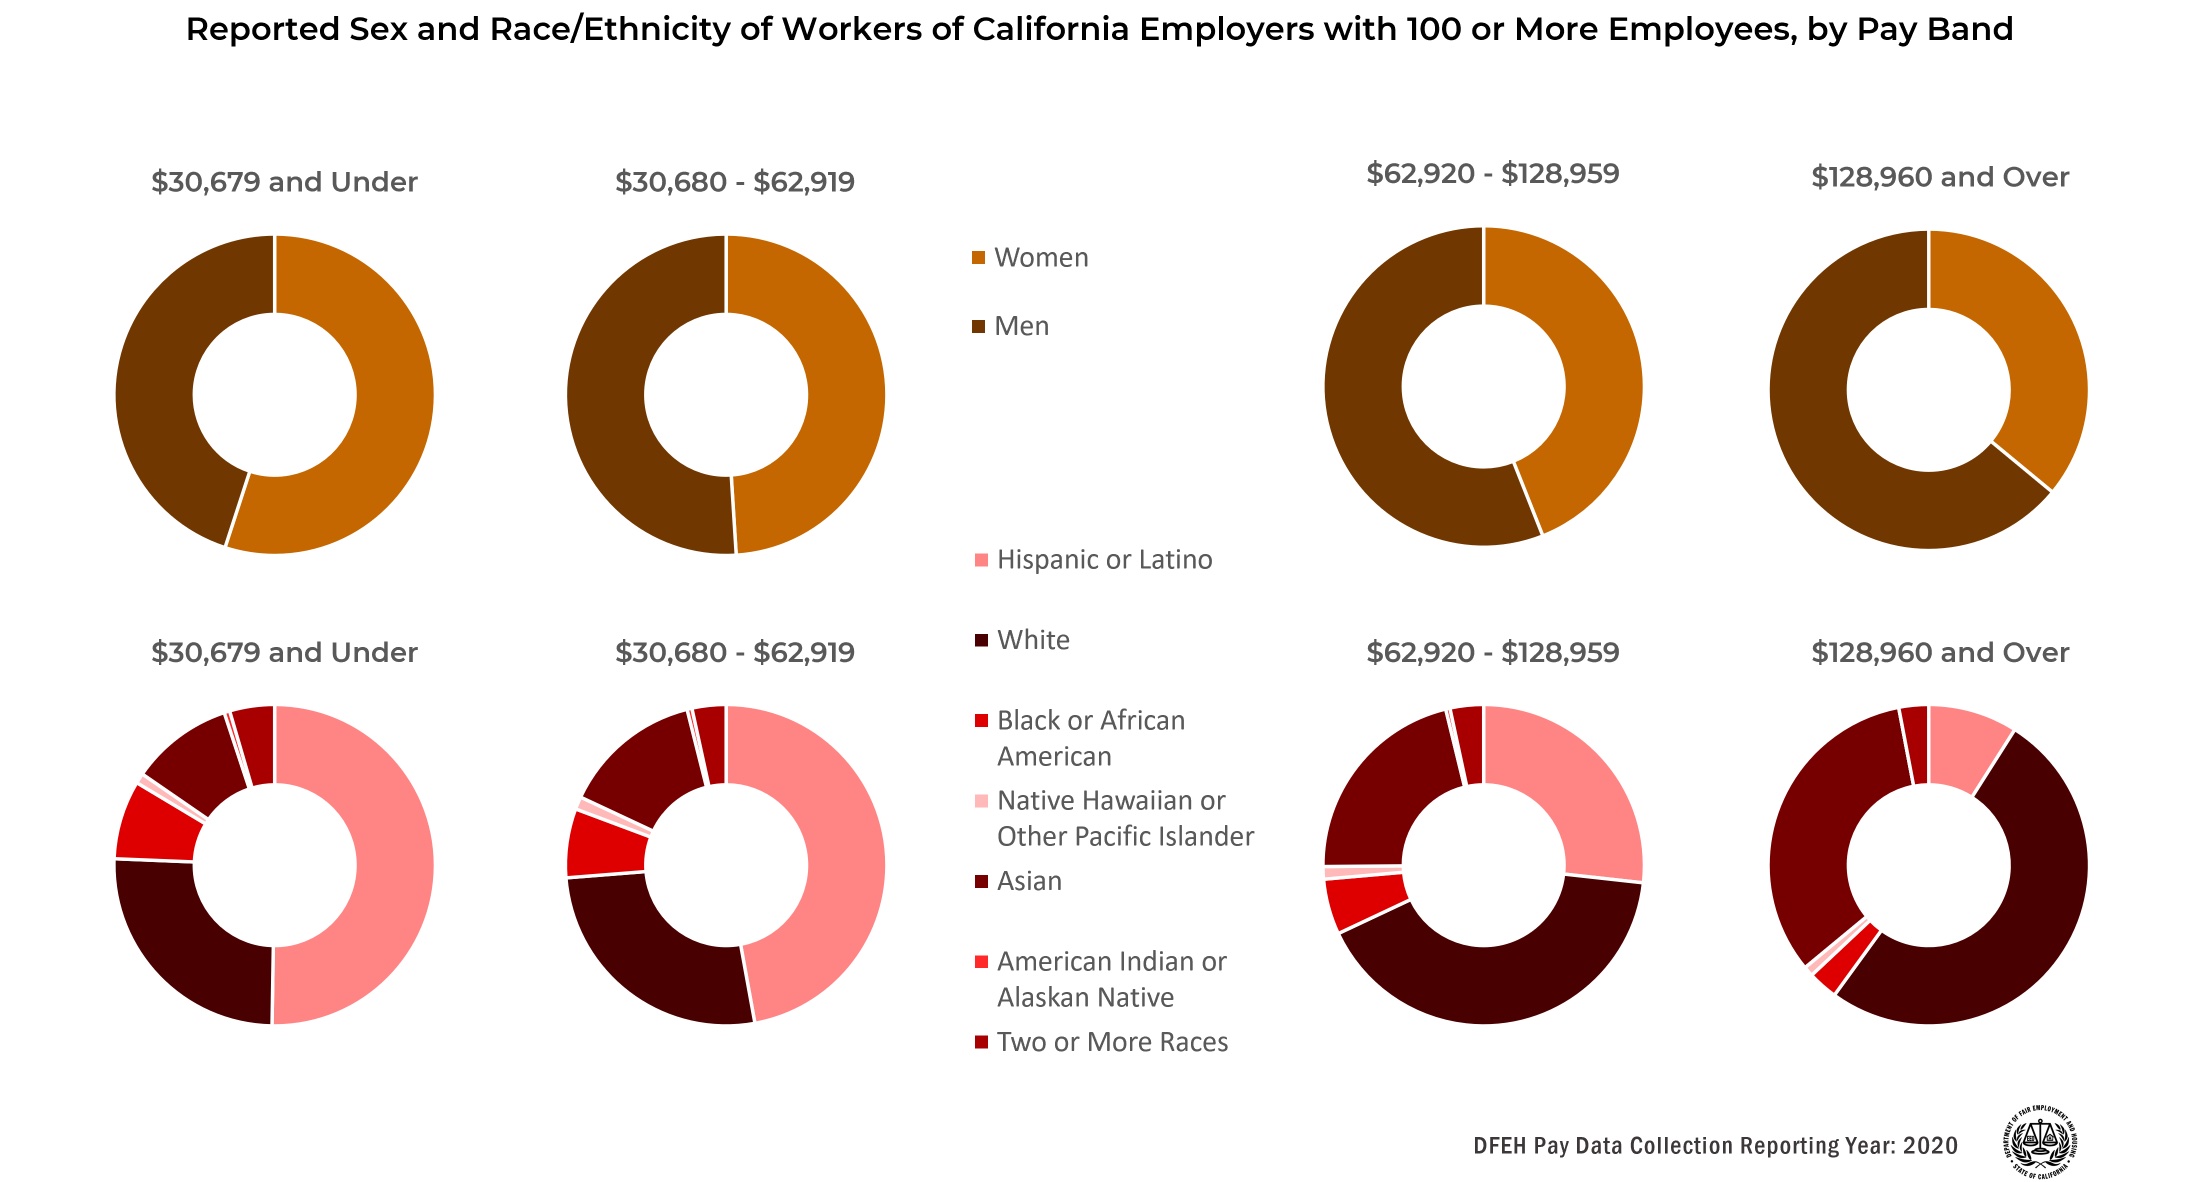 Graphs showing sex, race and ethnicity of workforce in California.